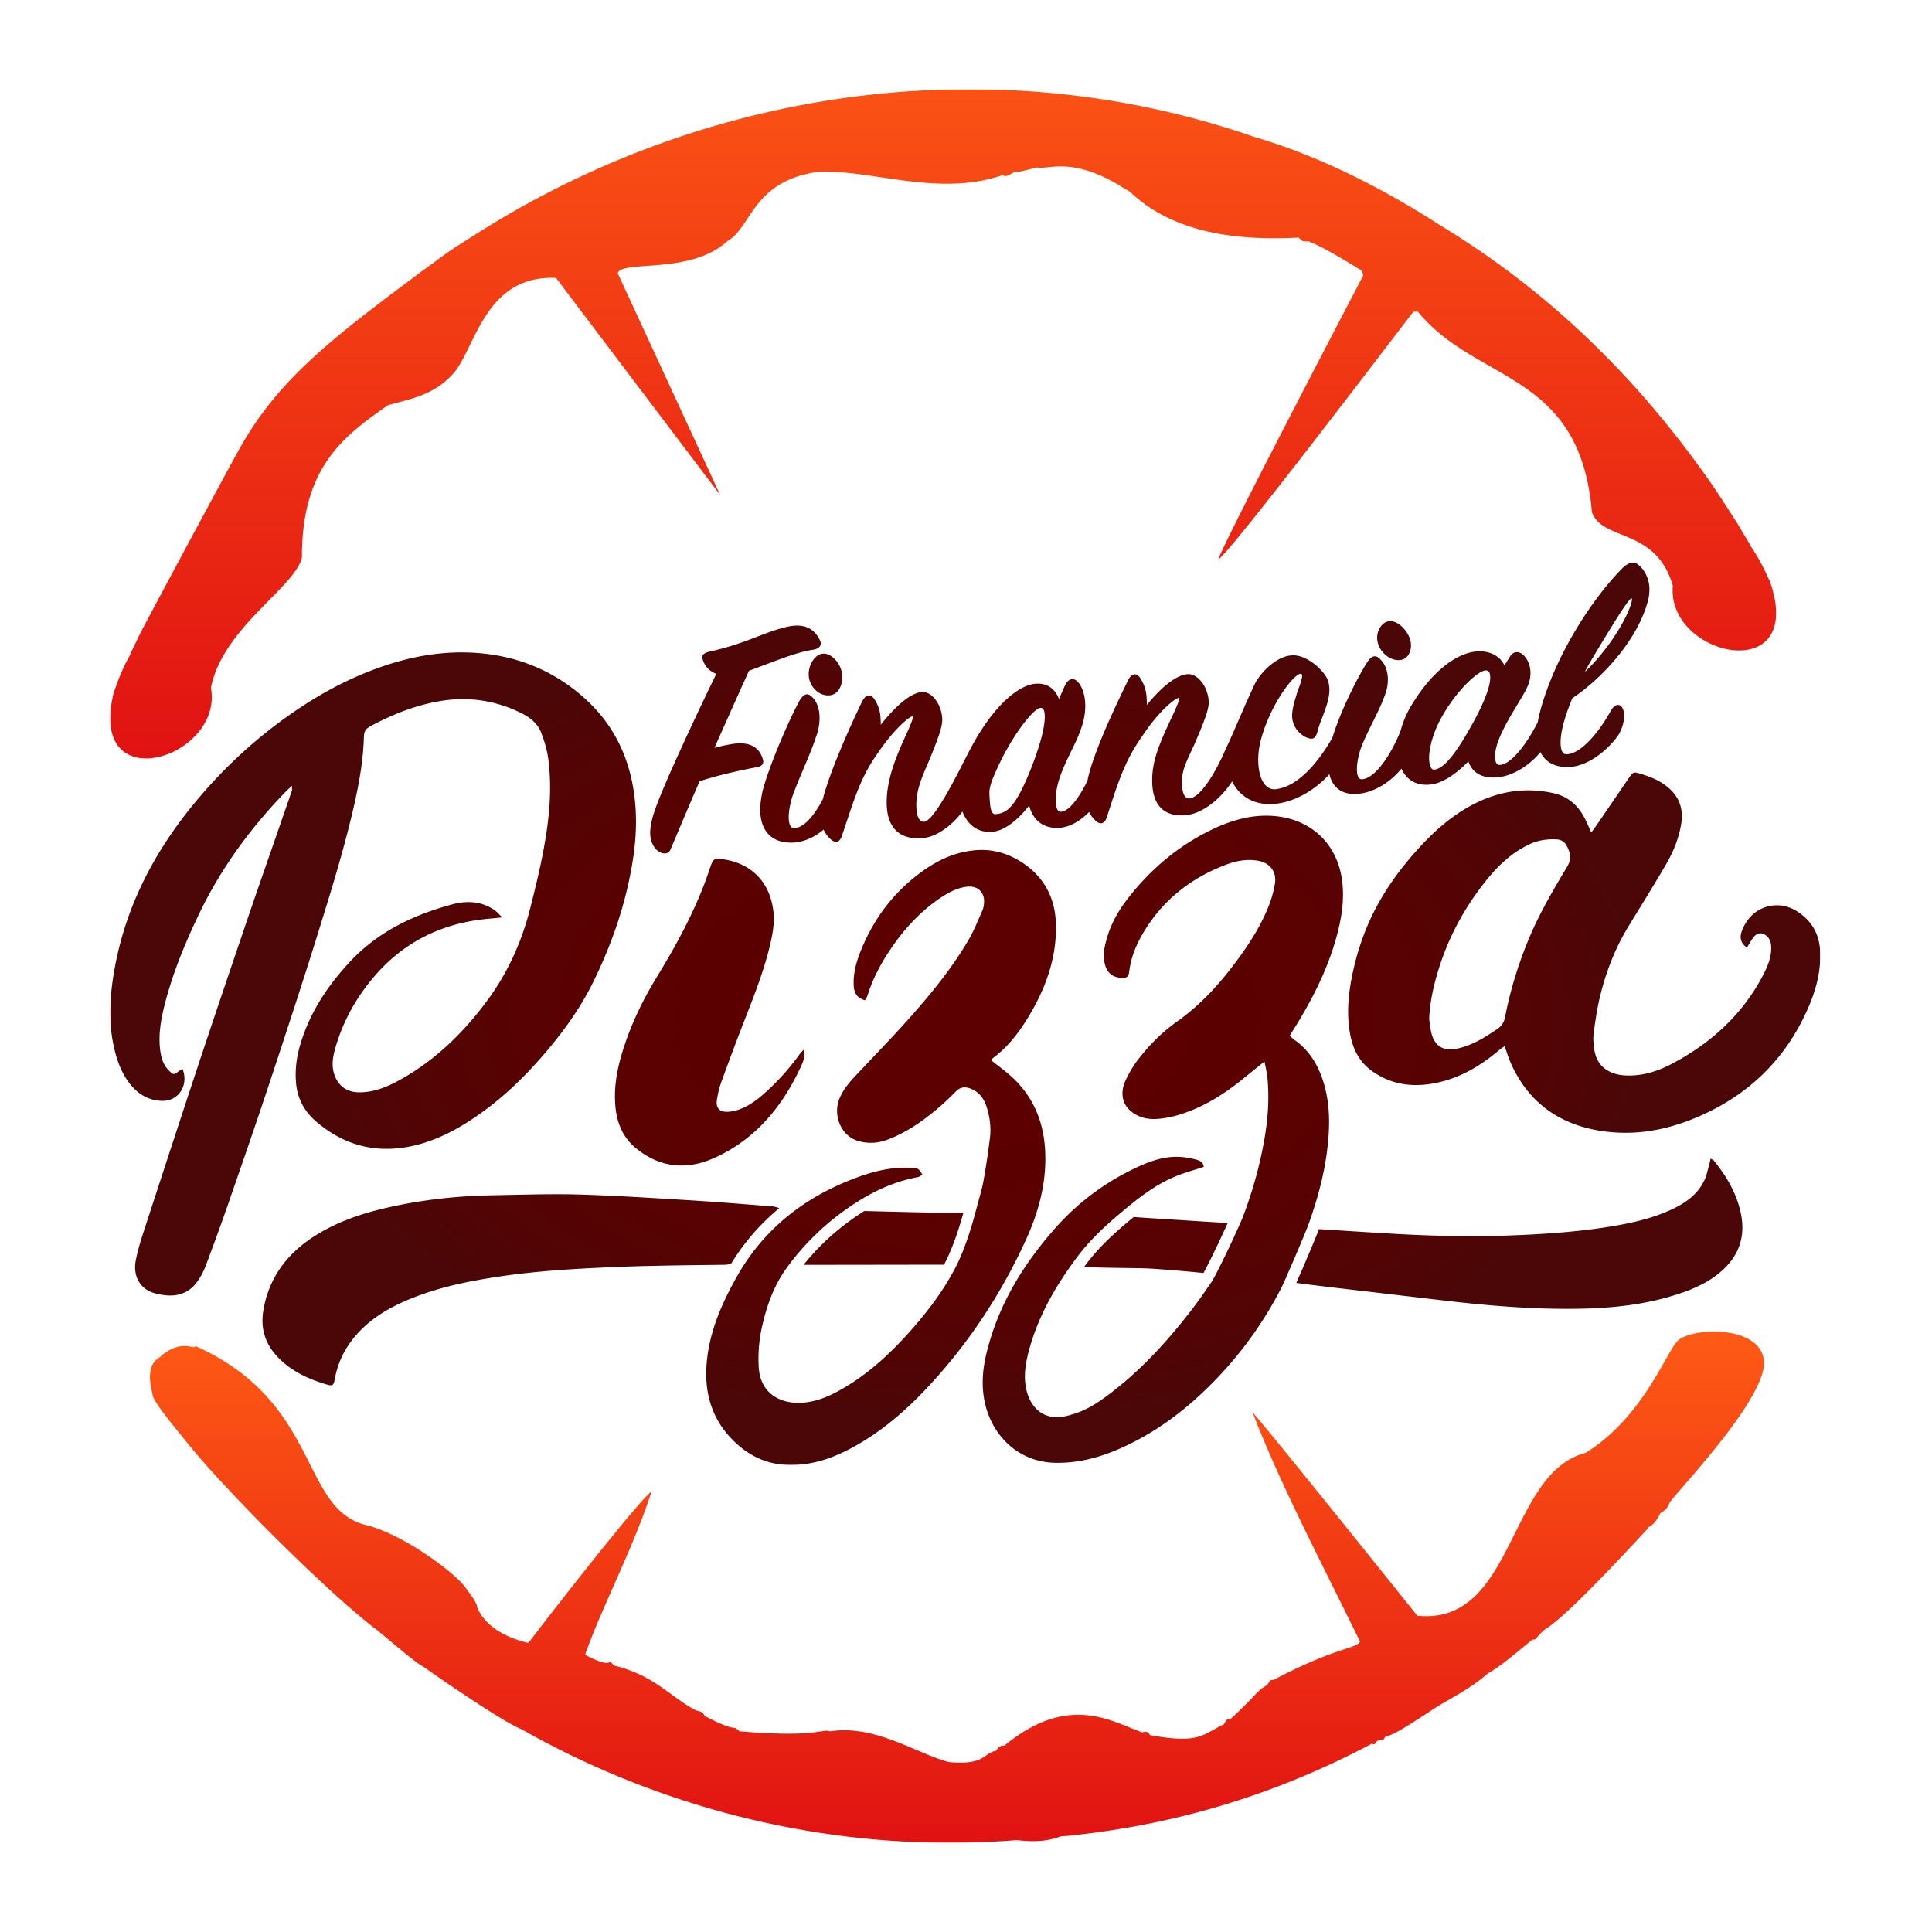 Ep 156 Financial Pizza Coach Pete D’Arruda talks with author and entrepreneur Jim Stovall.